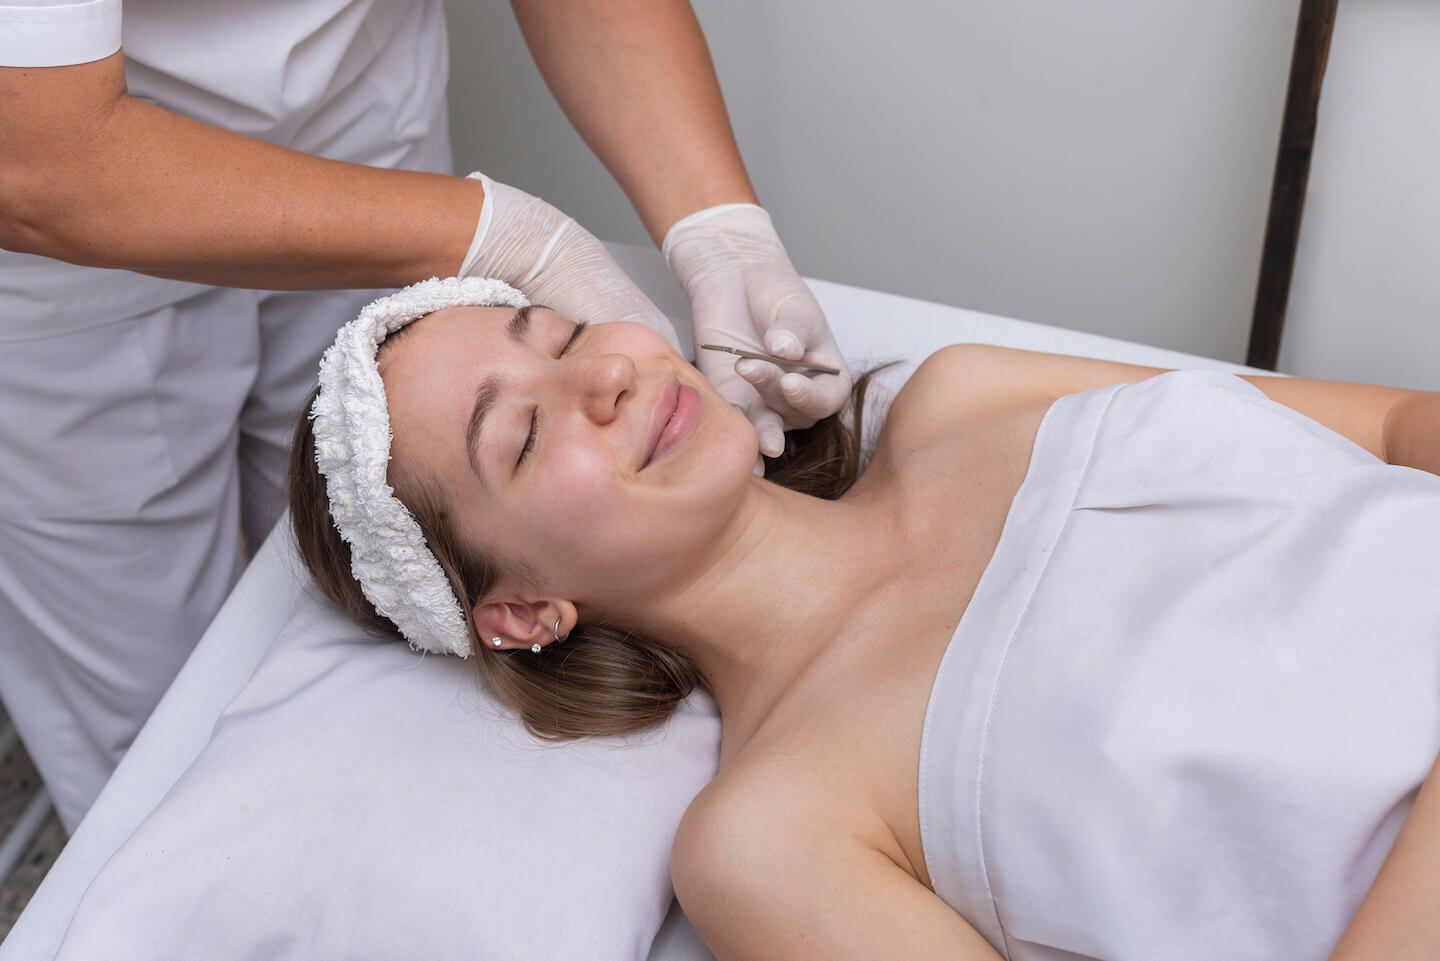 Woman getting a Dermaplaning treatment at a medical spa